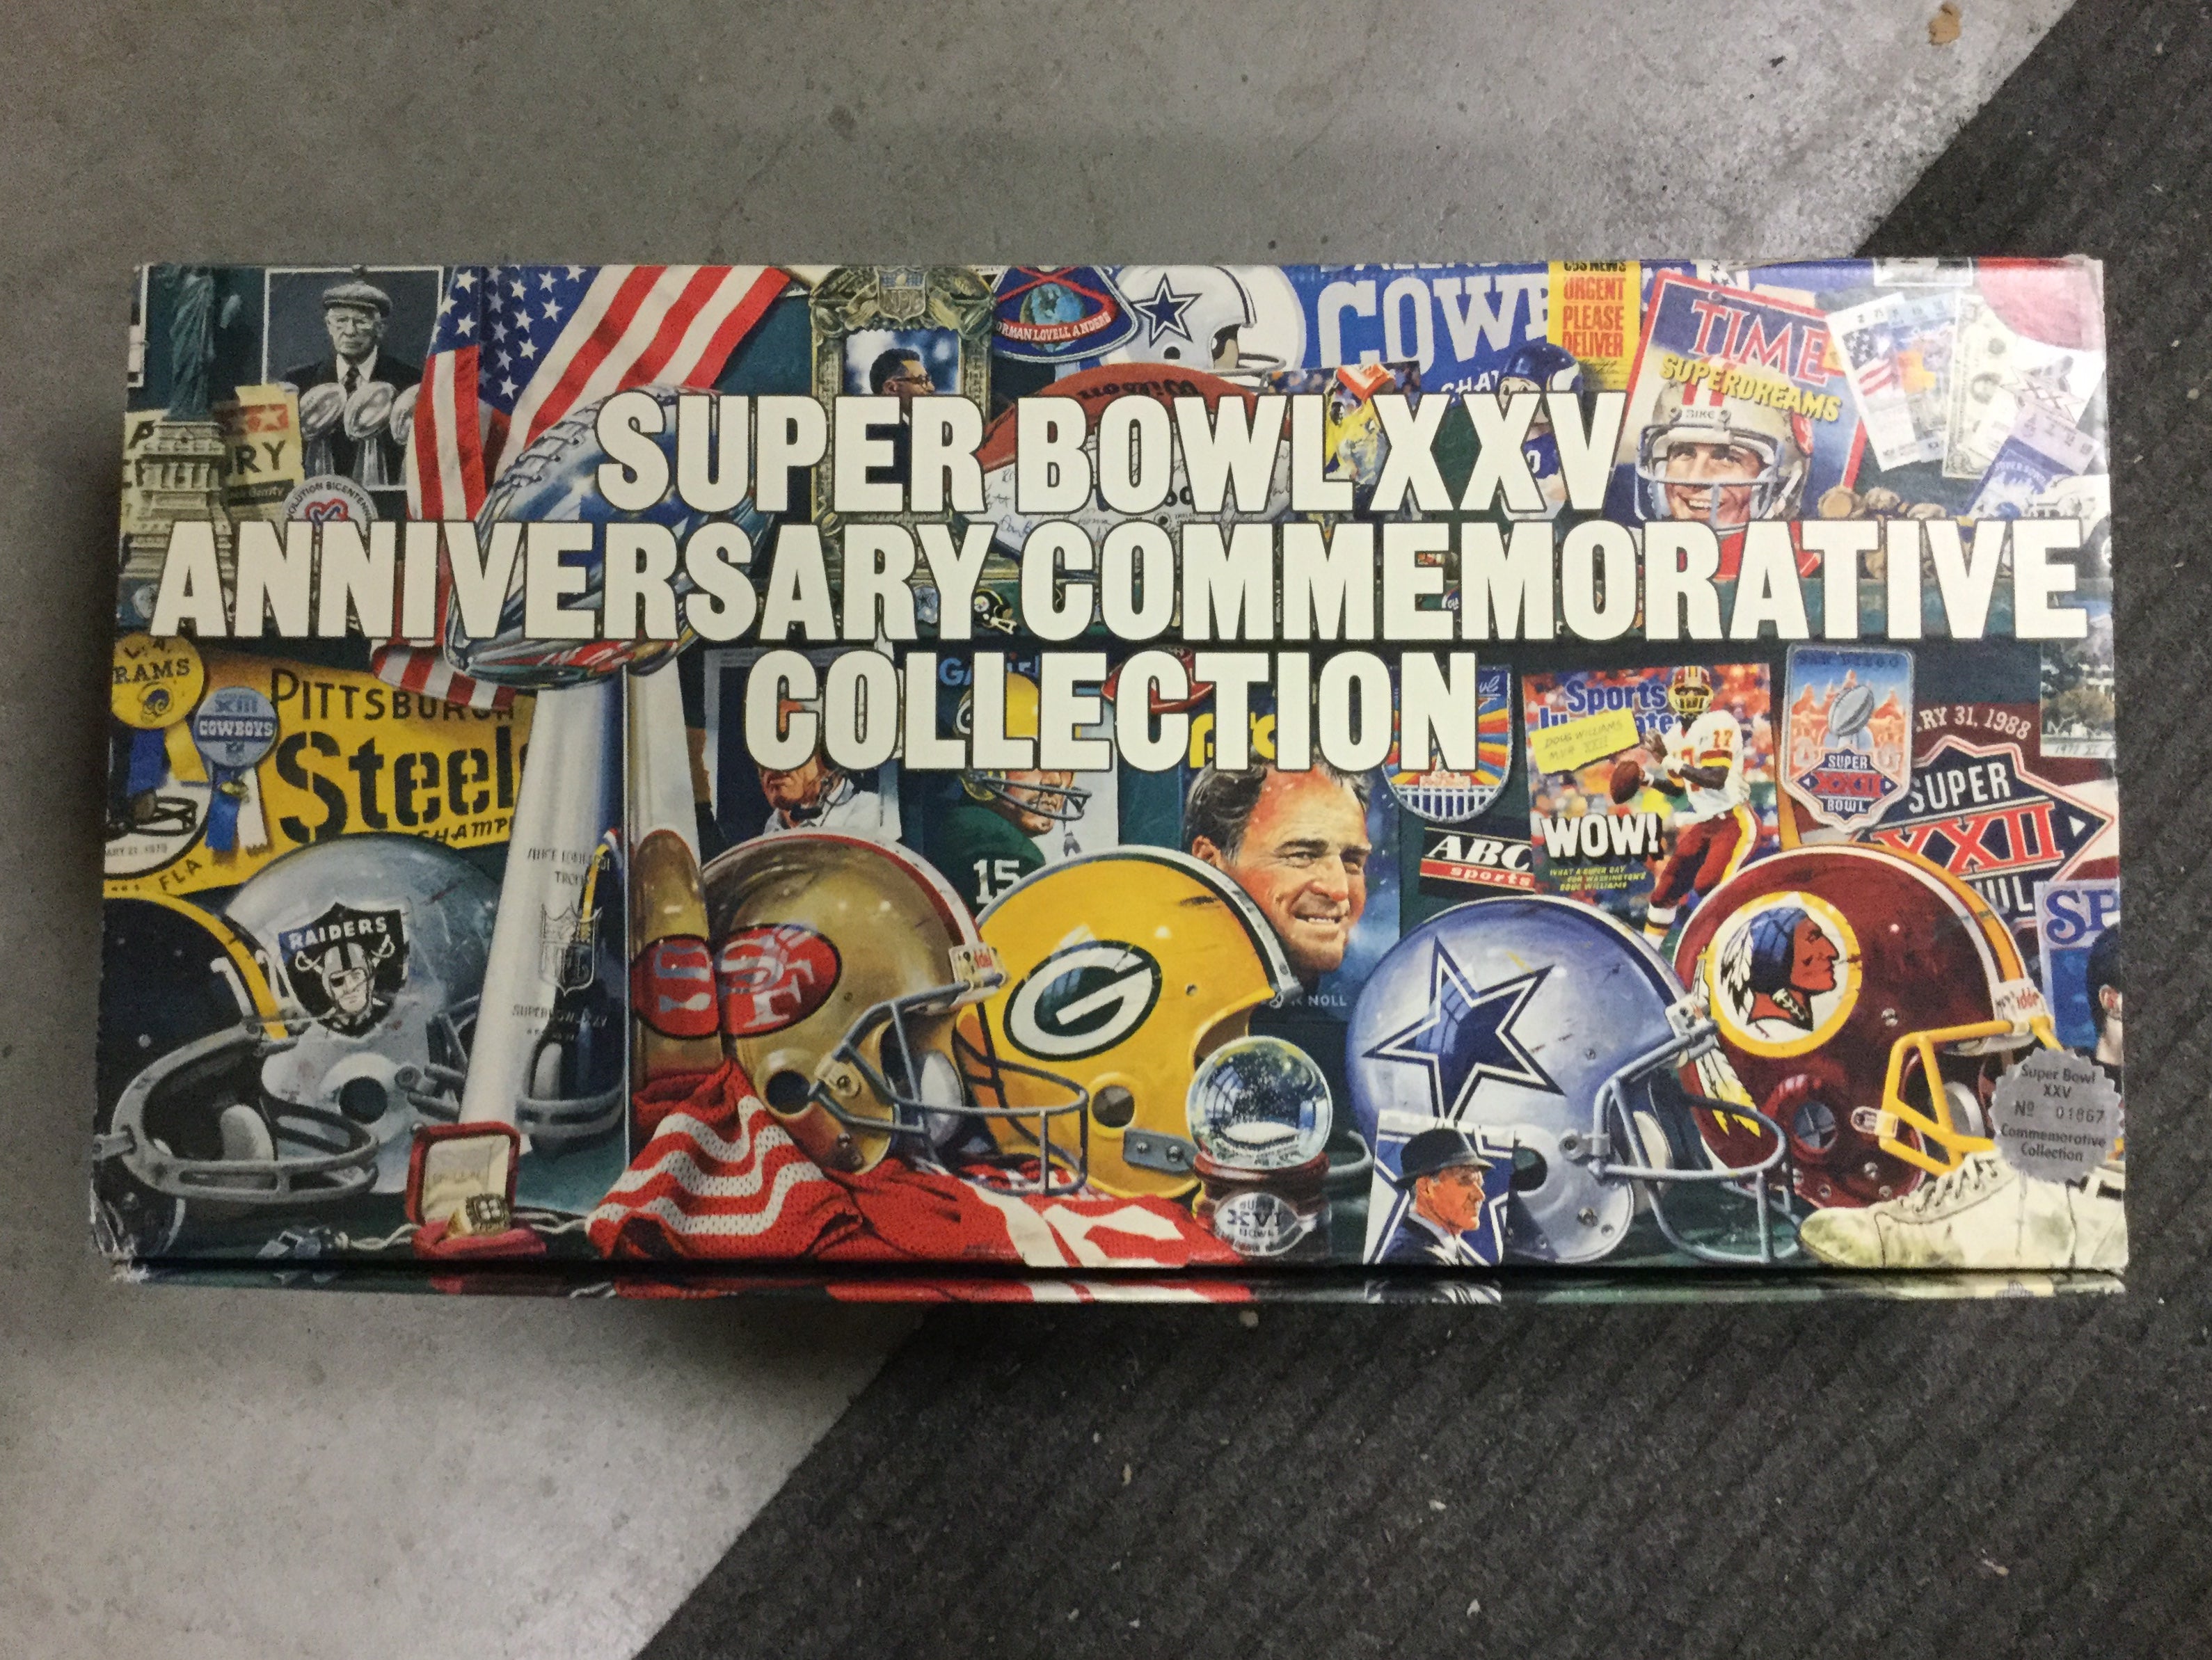 Super Bowl football XXV Anniversary Commerative collection